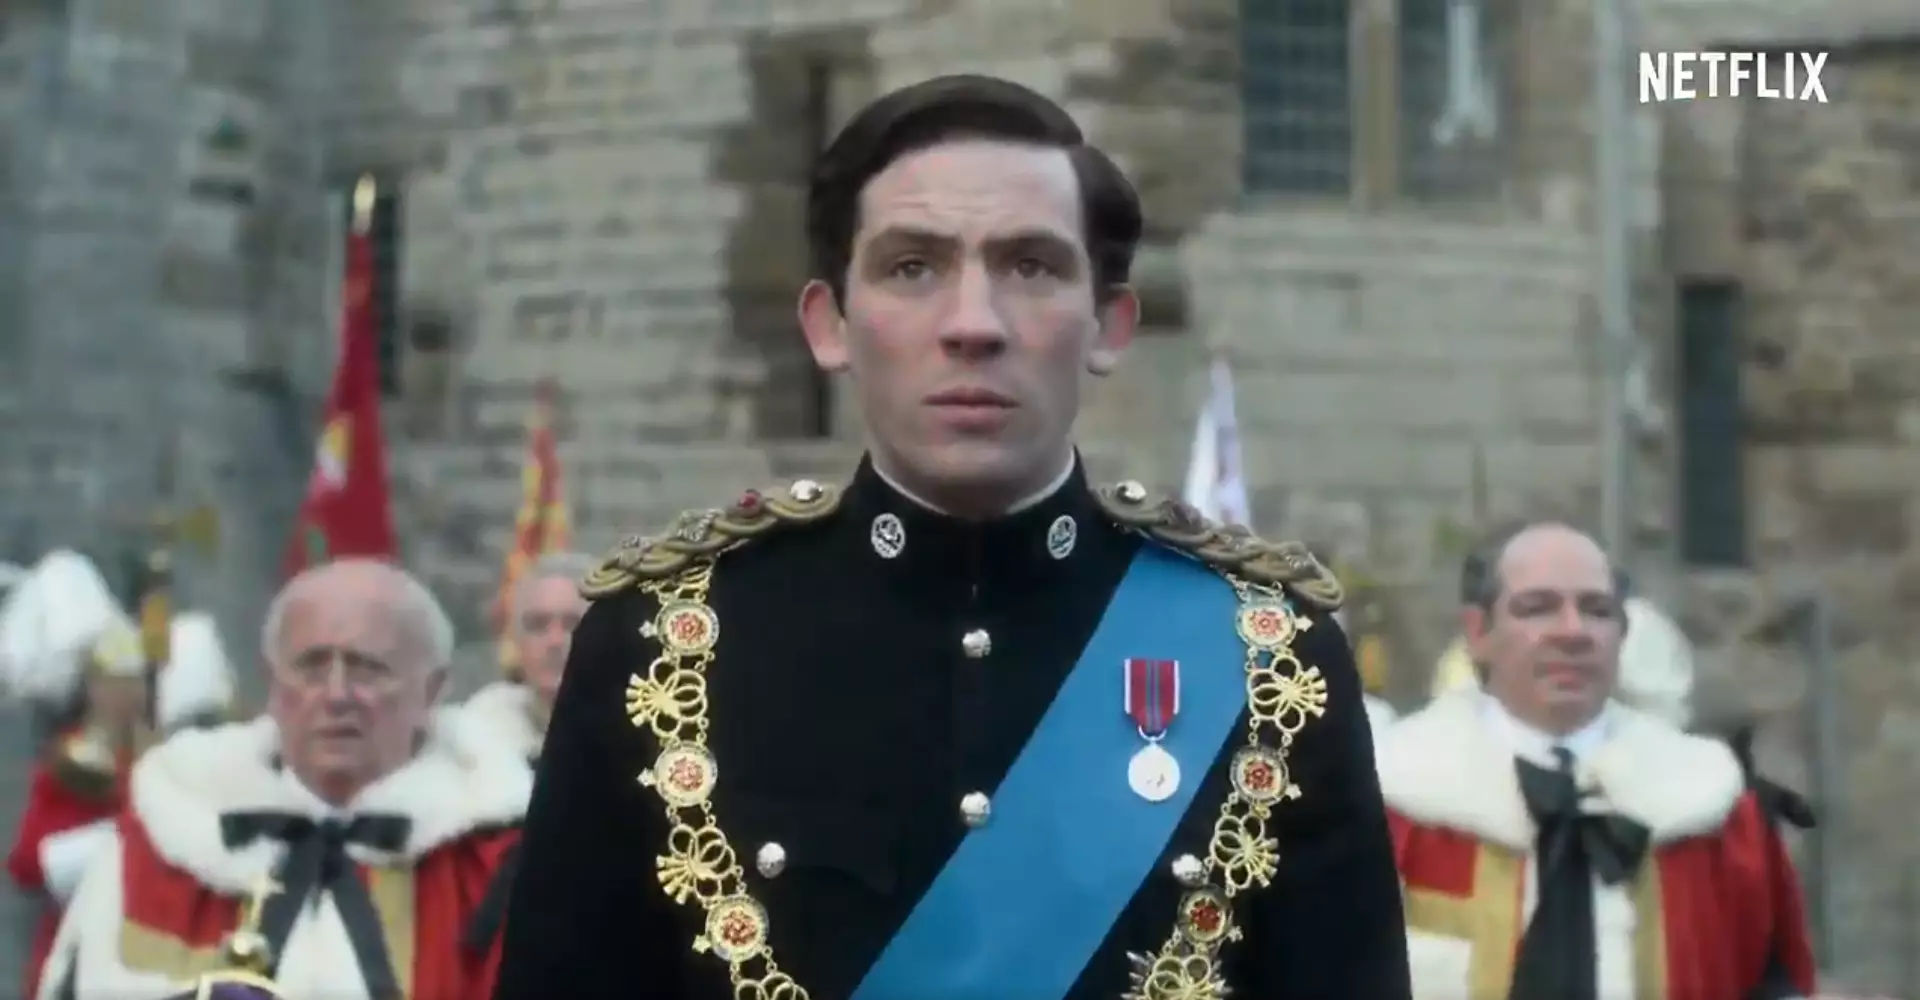 Josh O'Connor will play Prince Charles in season three of The Crown. (